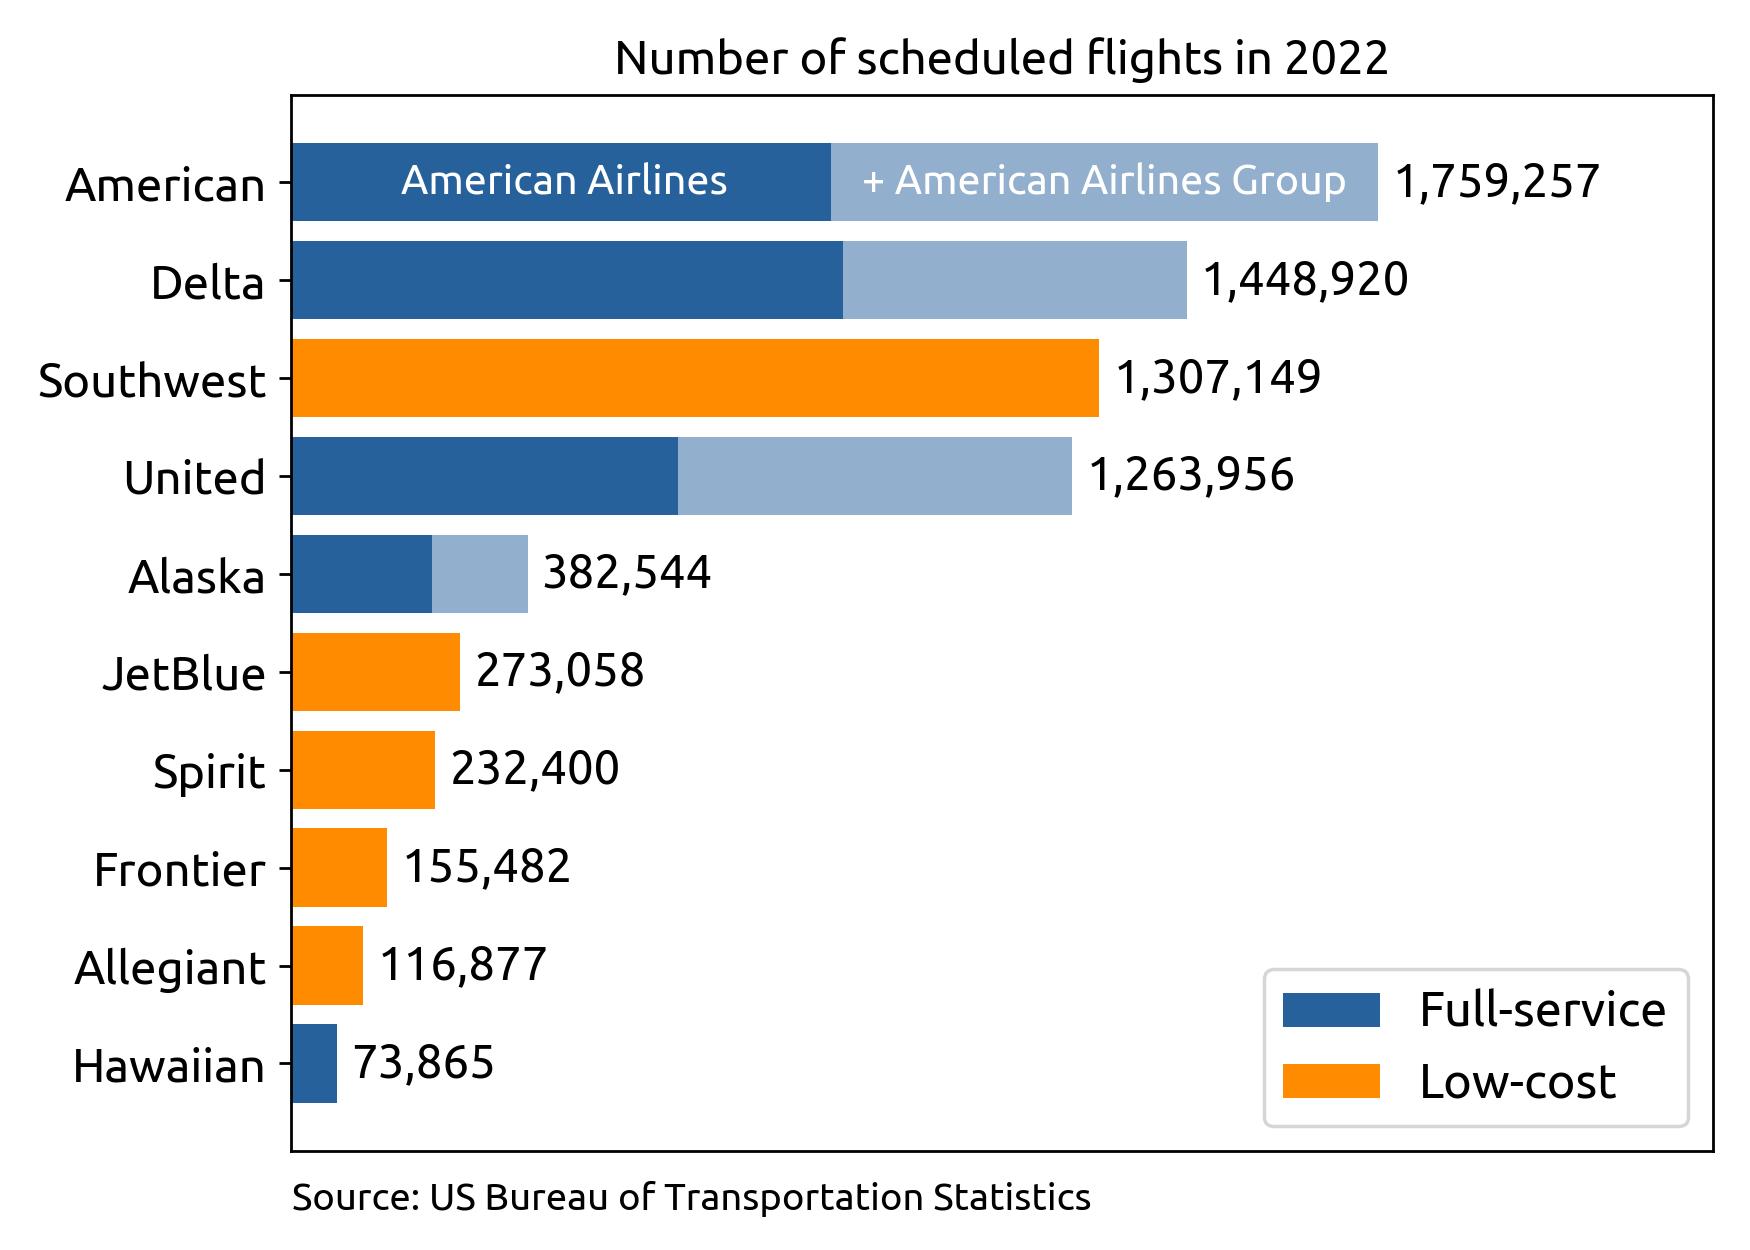 number of flights per marketing carrier in 2022